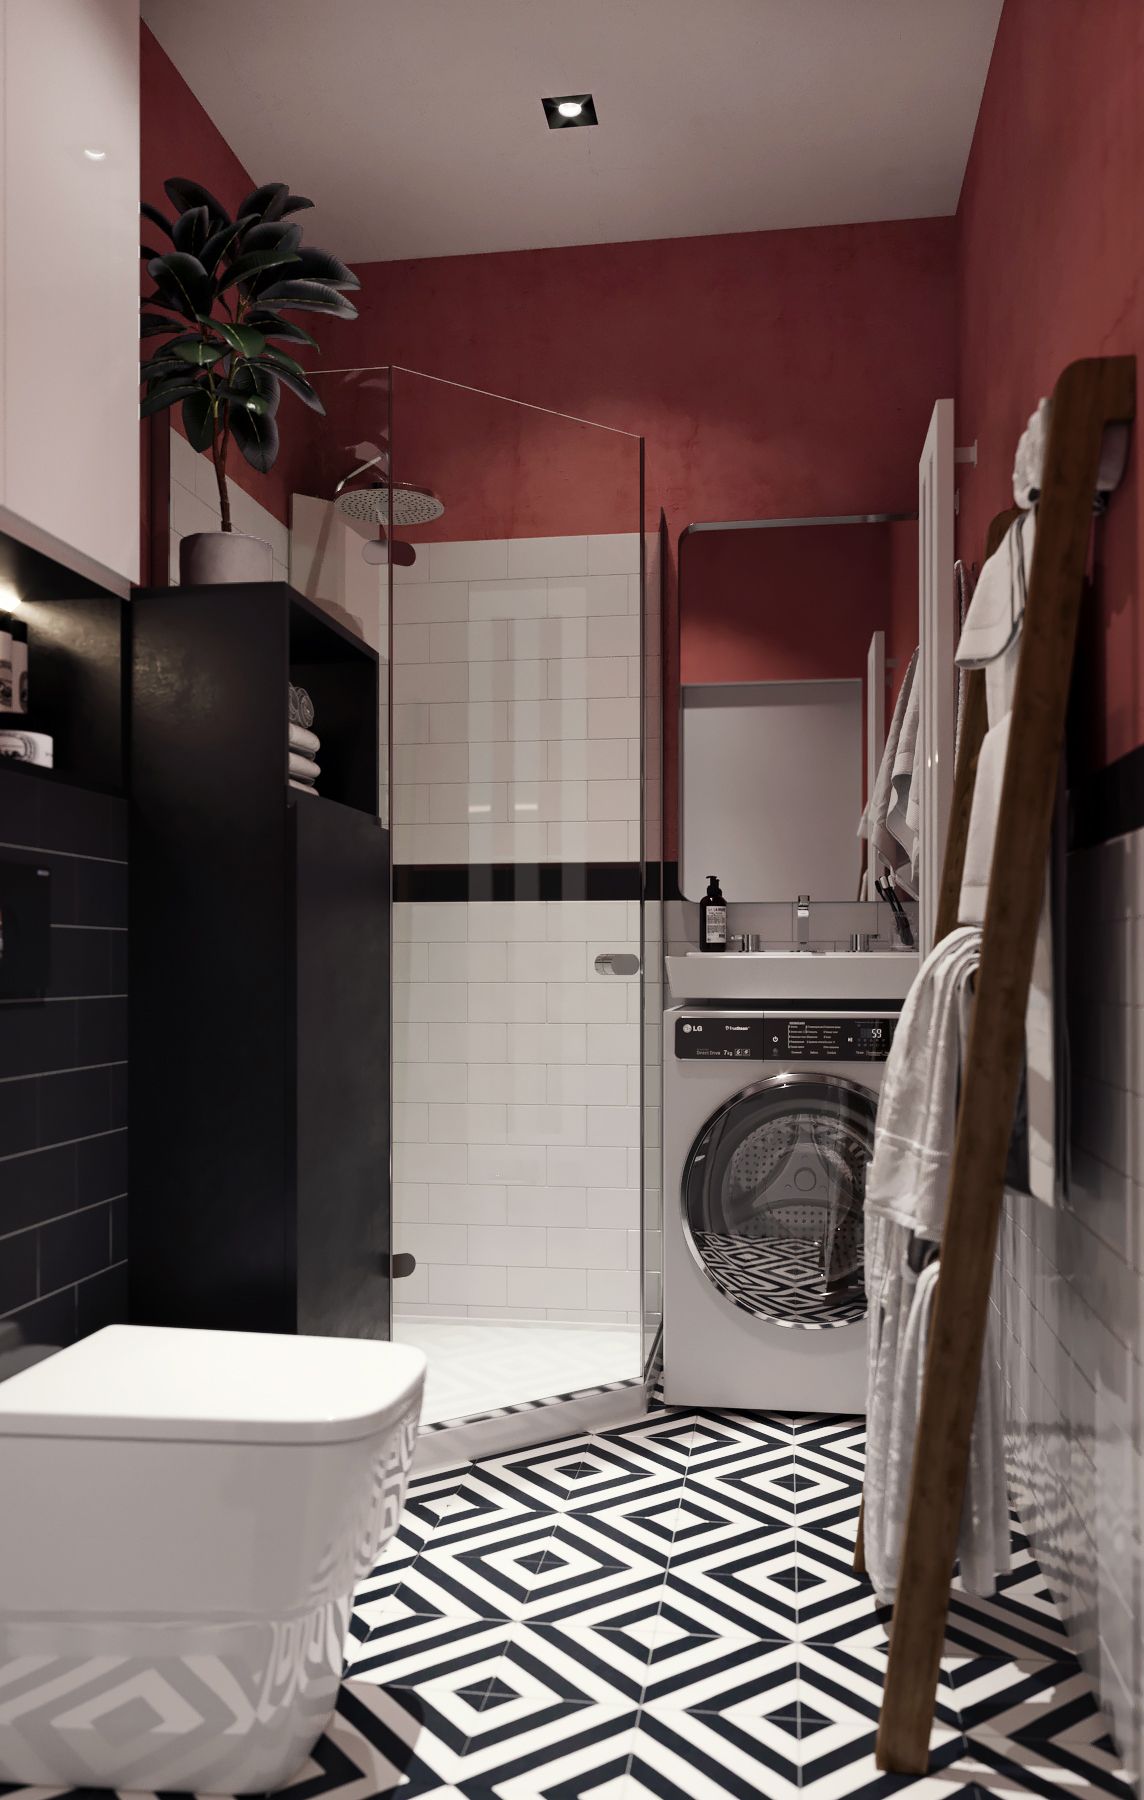 Clever burgundy colored bathroom